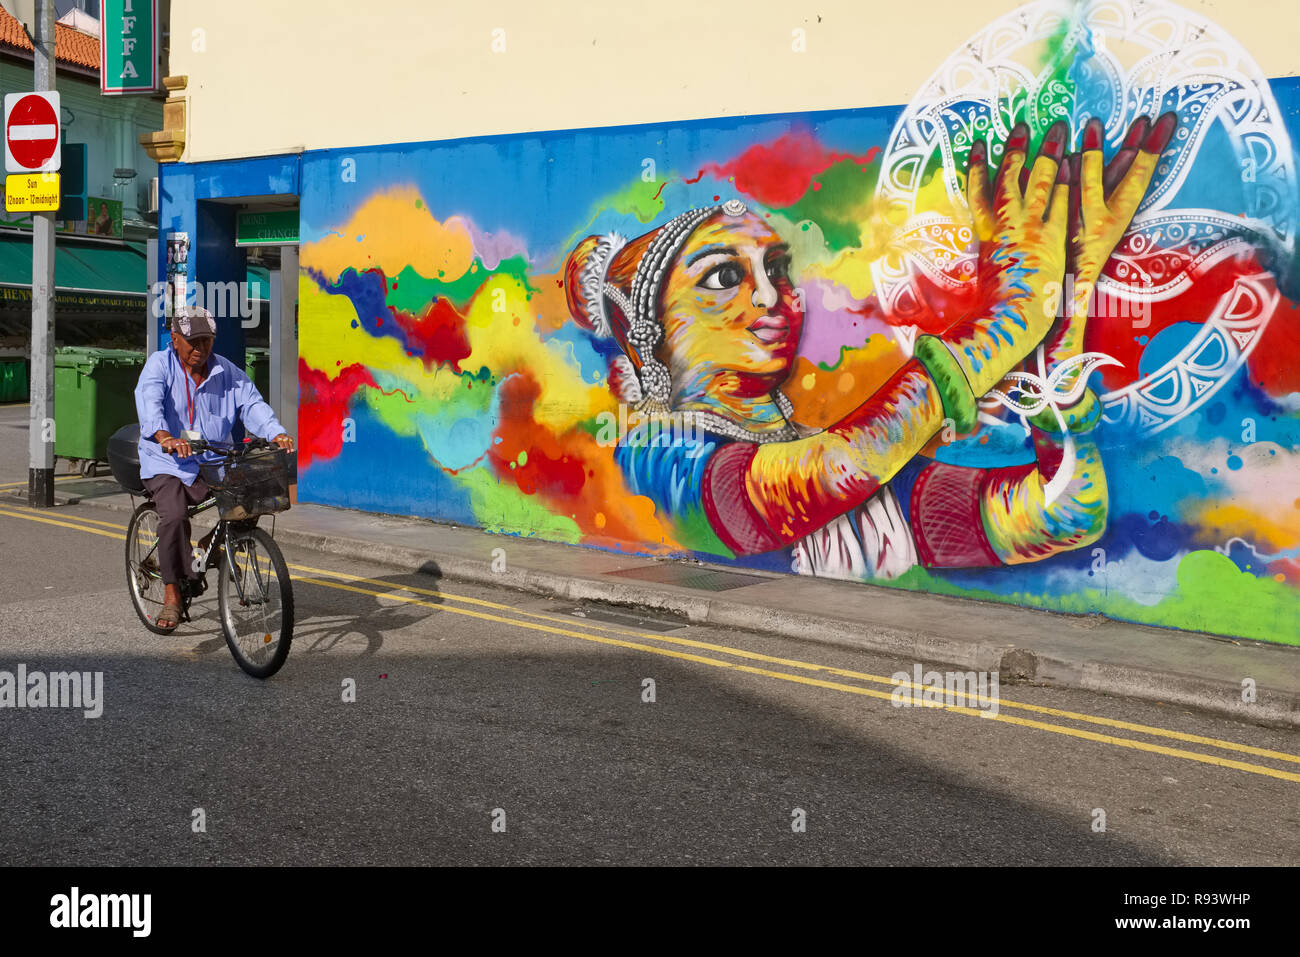 A cyclist passing a wall painting depicting a classical Indian dancer, in Clive Street, Little India, Singapore Stock Photo